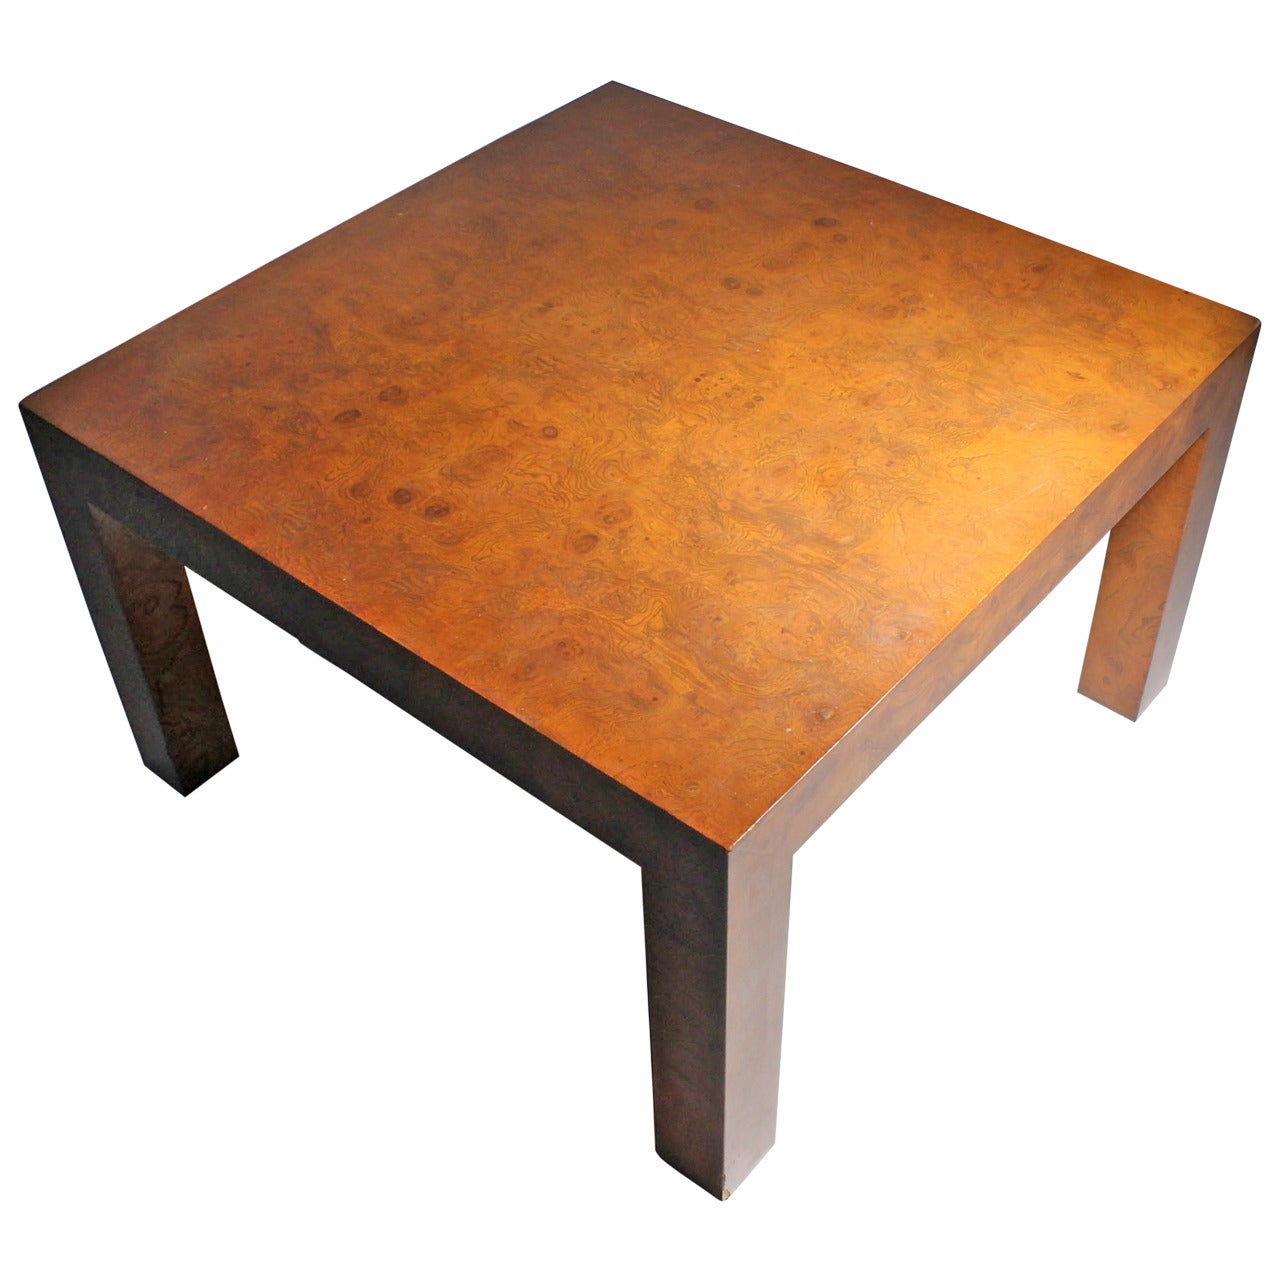 Milo Baughman Burl Olivewood Parsons Coffee Table